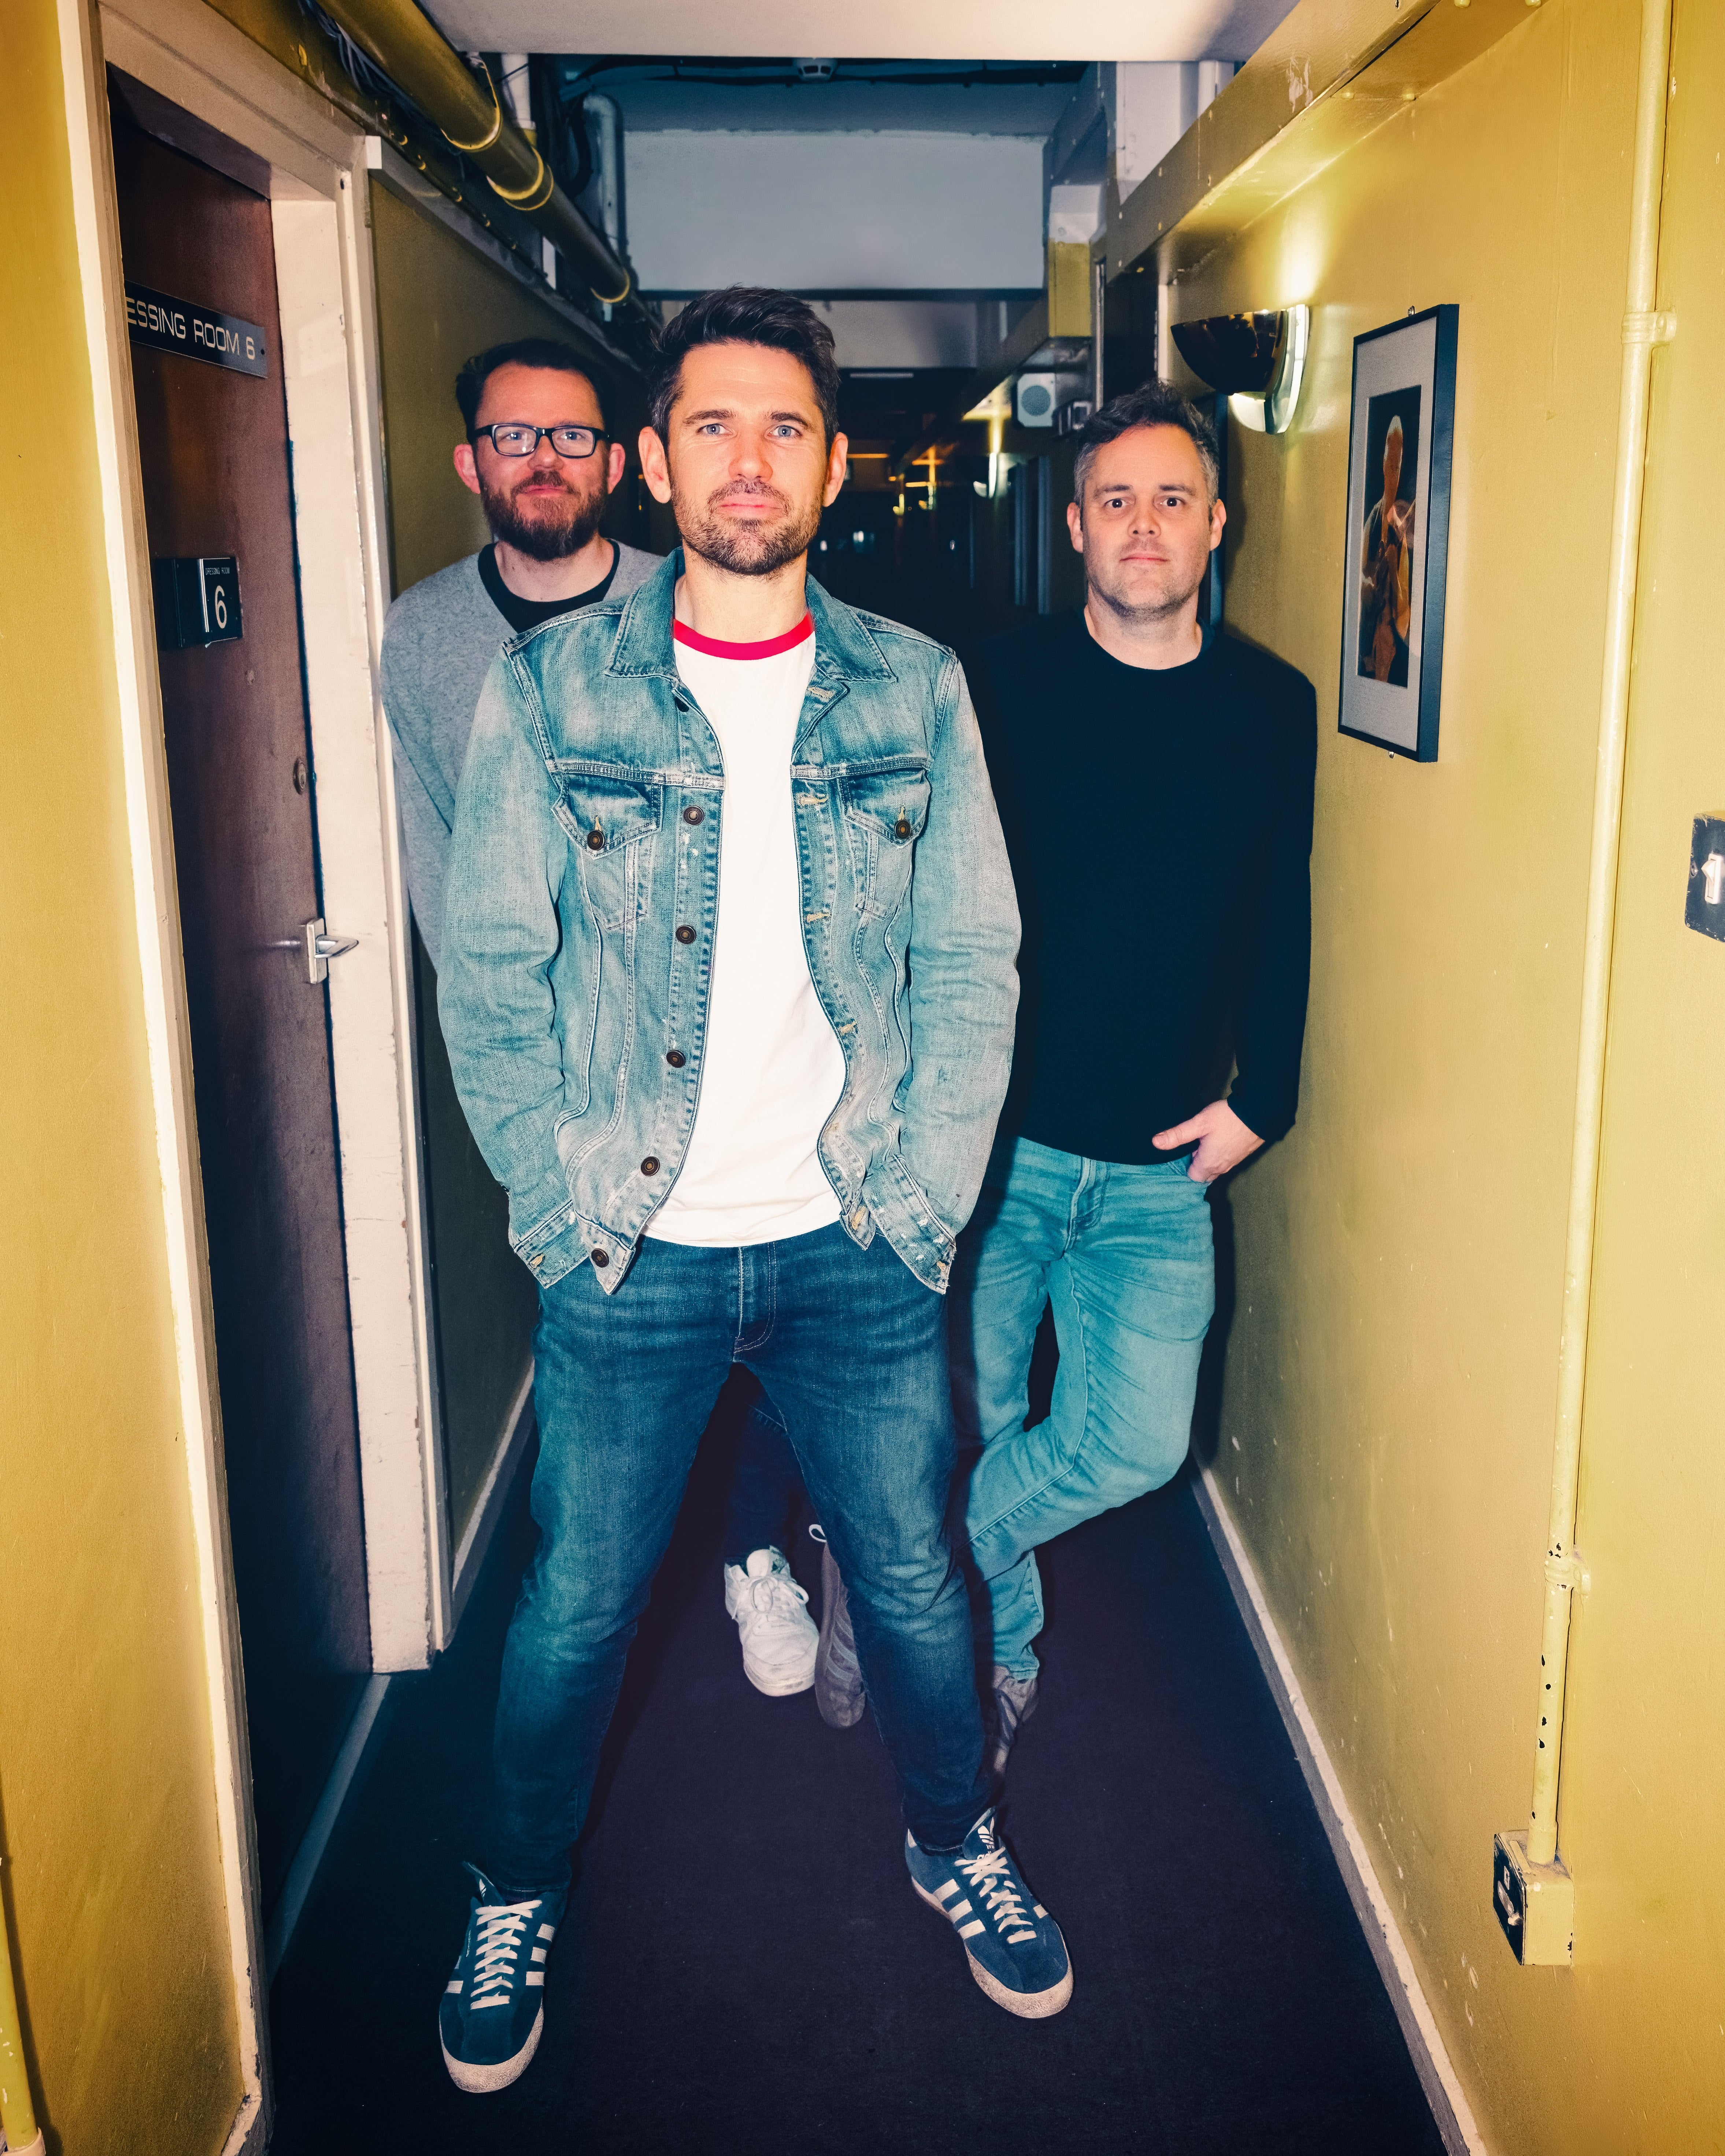 Scouting for Girls in London promo photo for Priority from O2 presale offer code